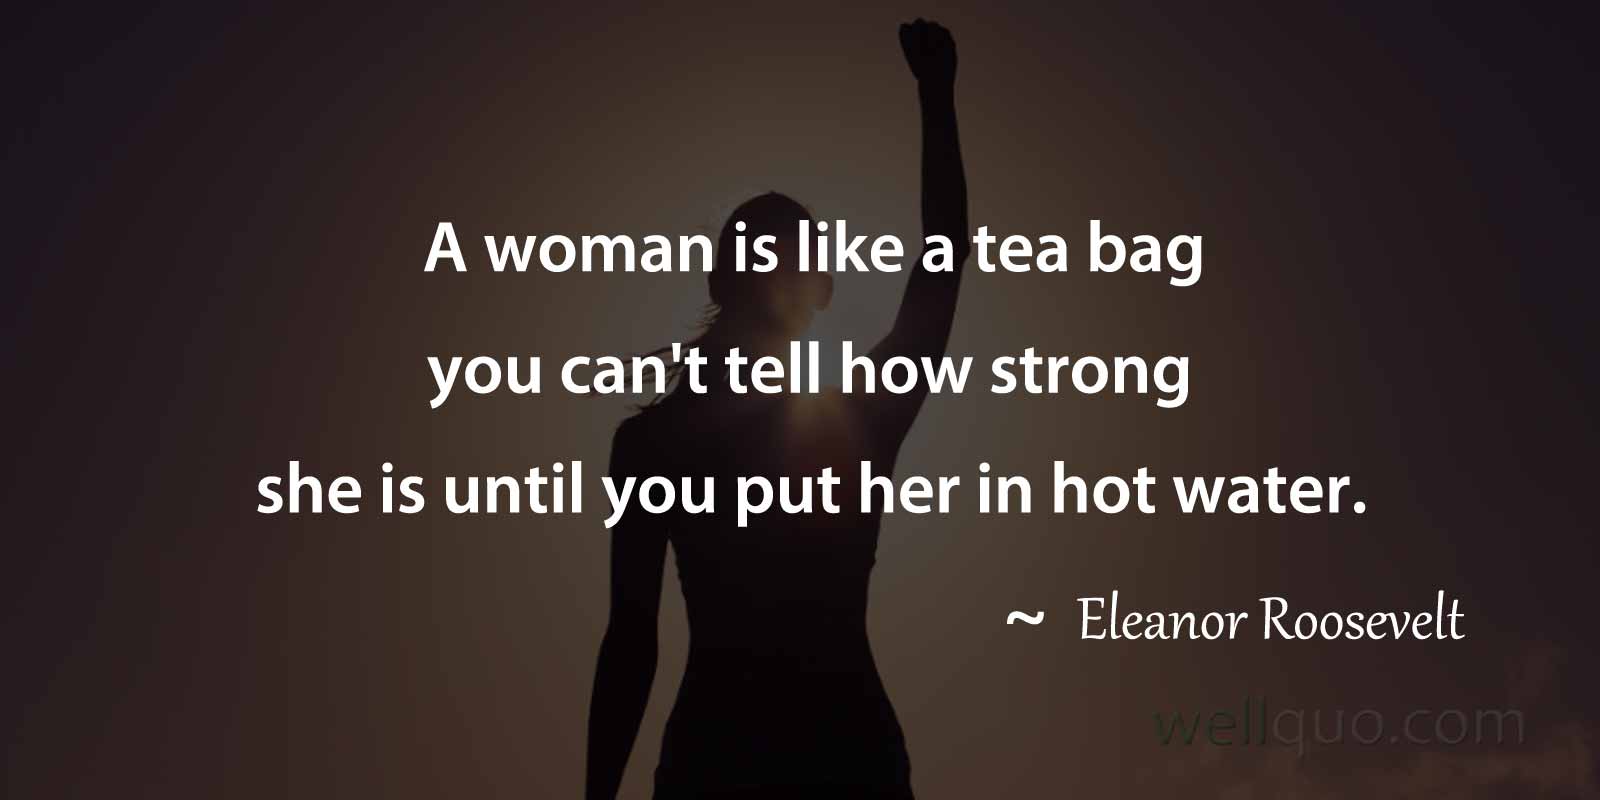 Strong Women Quotes For Every Women - Well Quo